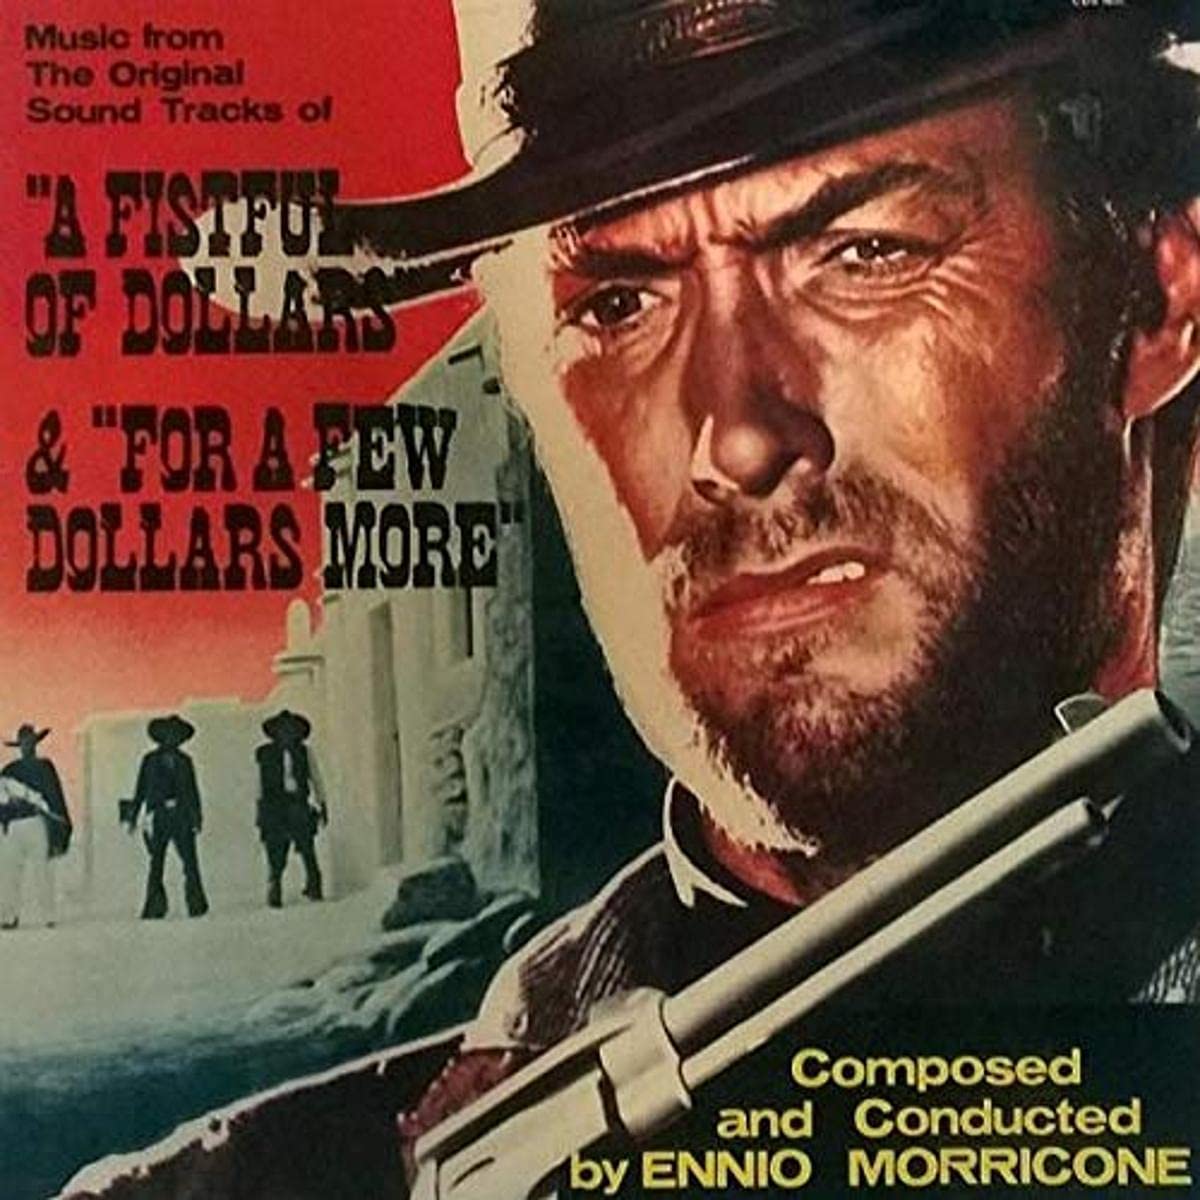 A Fistful of Dollars / For a Few Dollars More - Vinyl